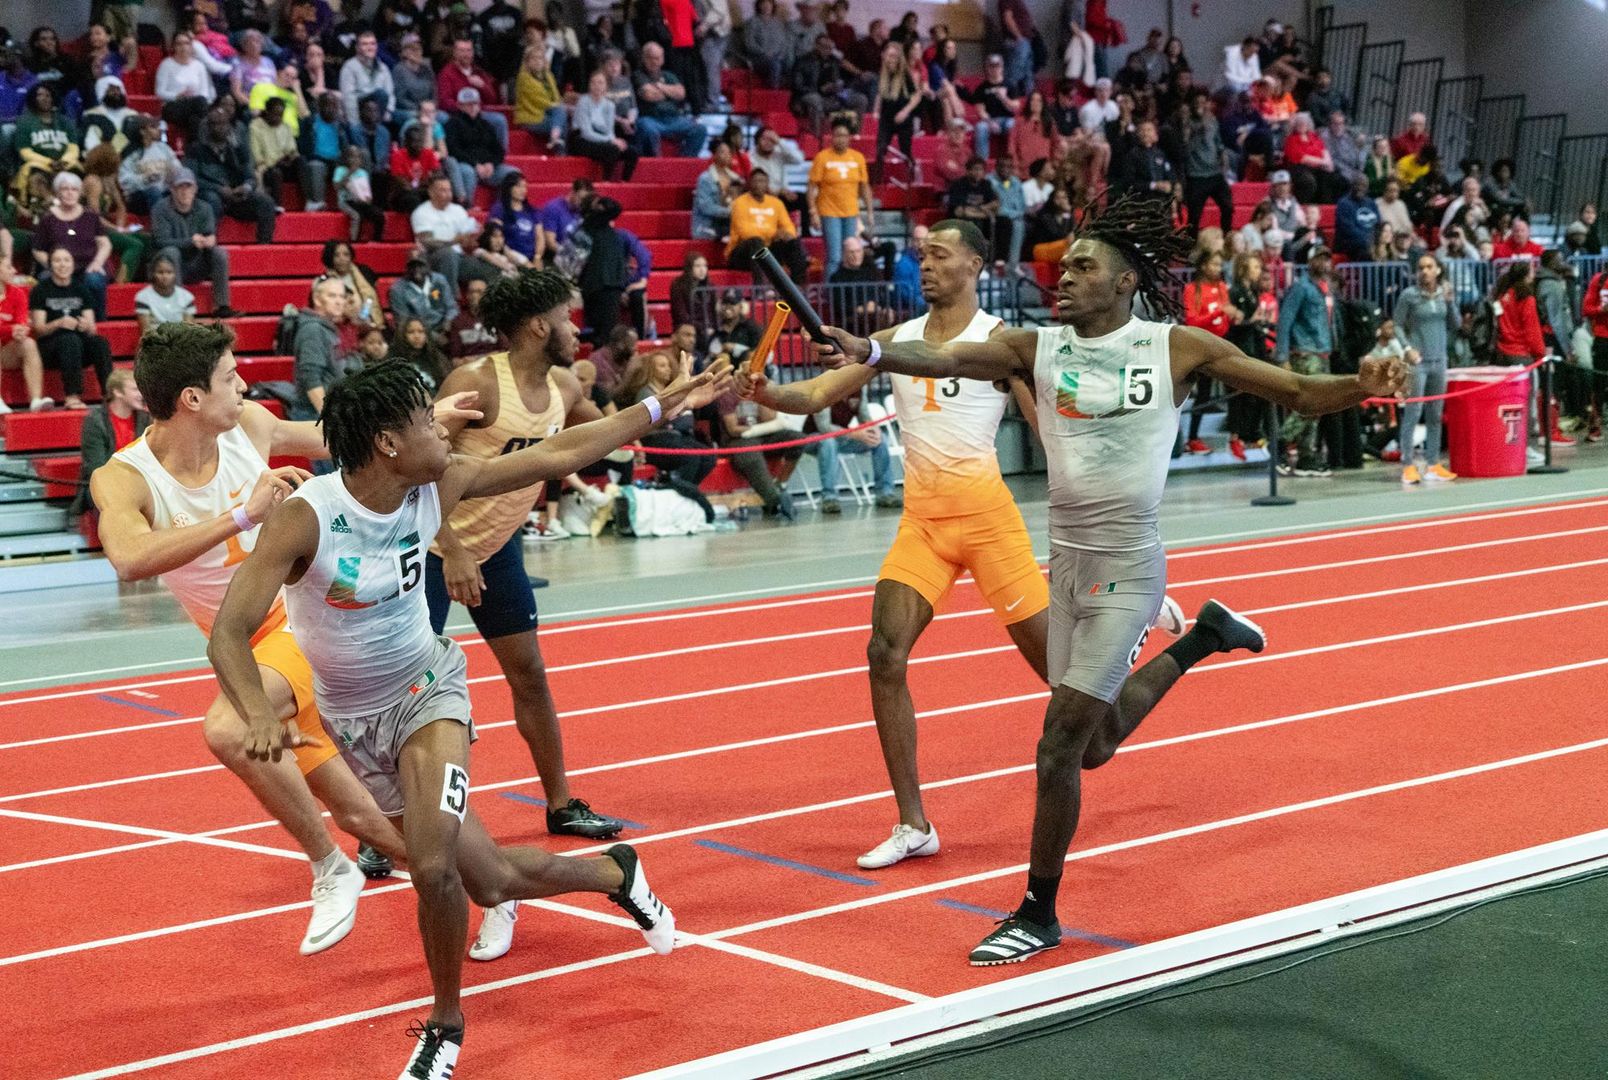 Six Canes PR on Final Day in Lubbock